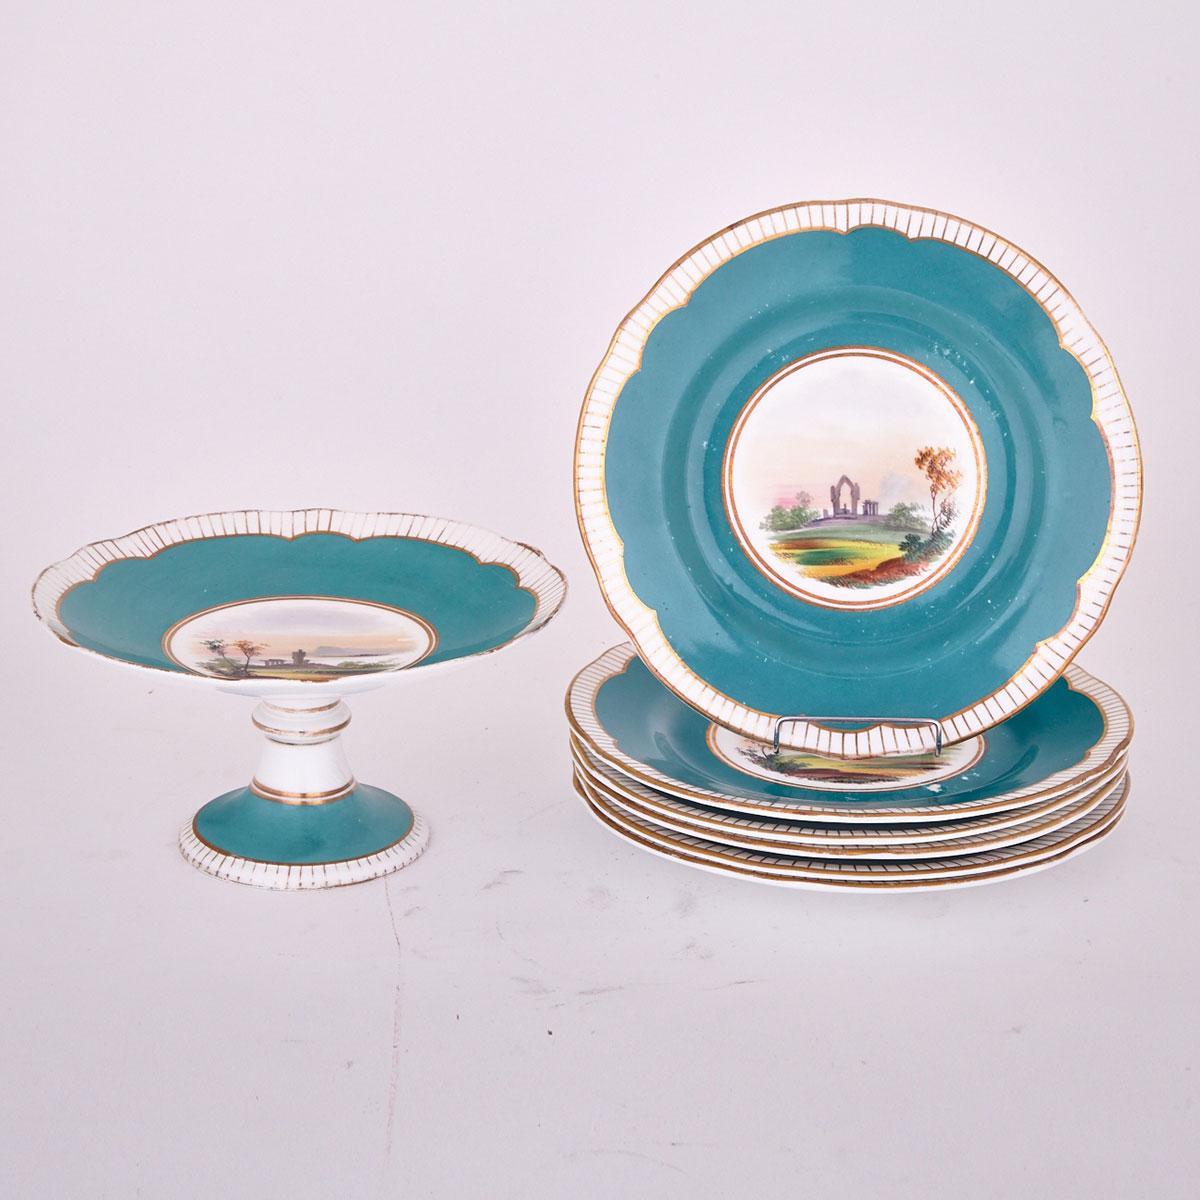 English Porcelain Turquoise Ground Part Dessert Service, late 19th century